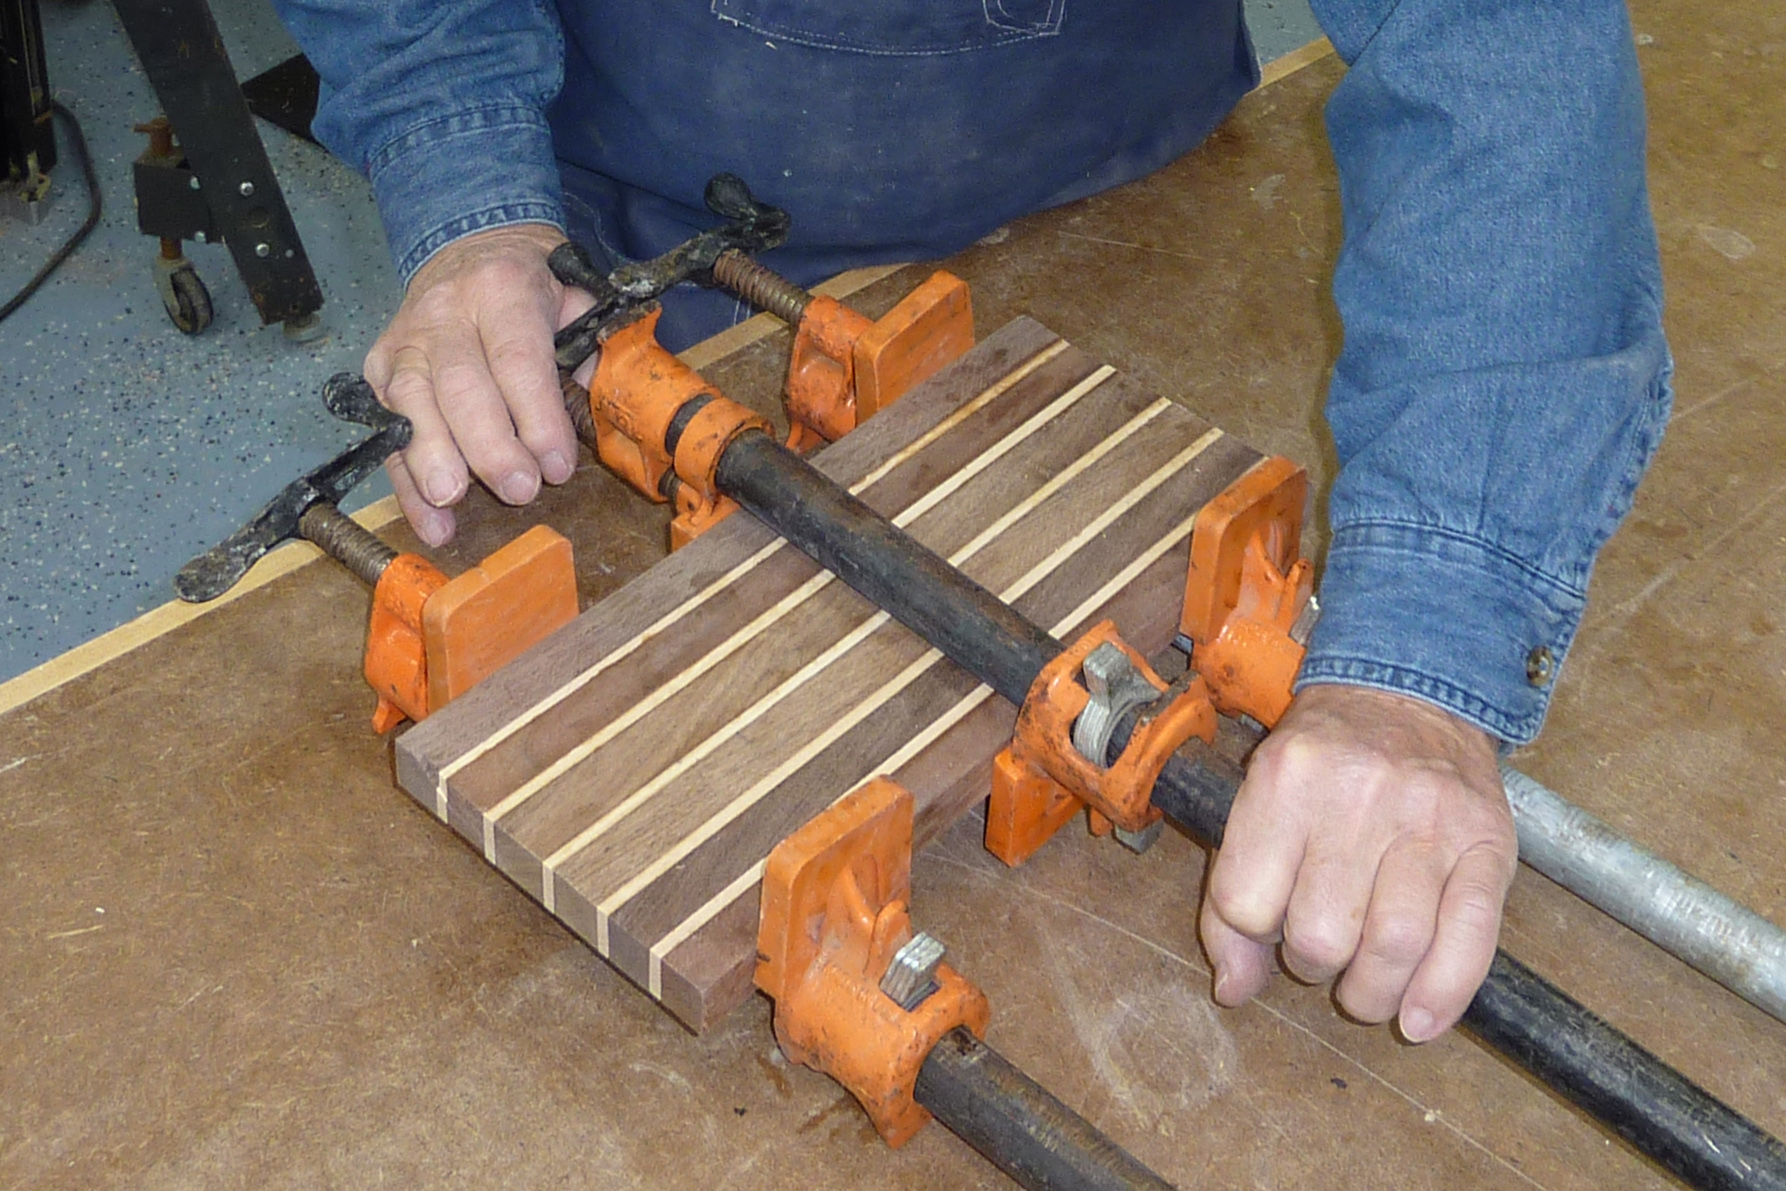 clamping wood pieces